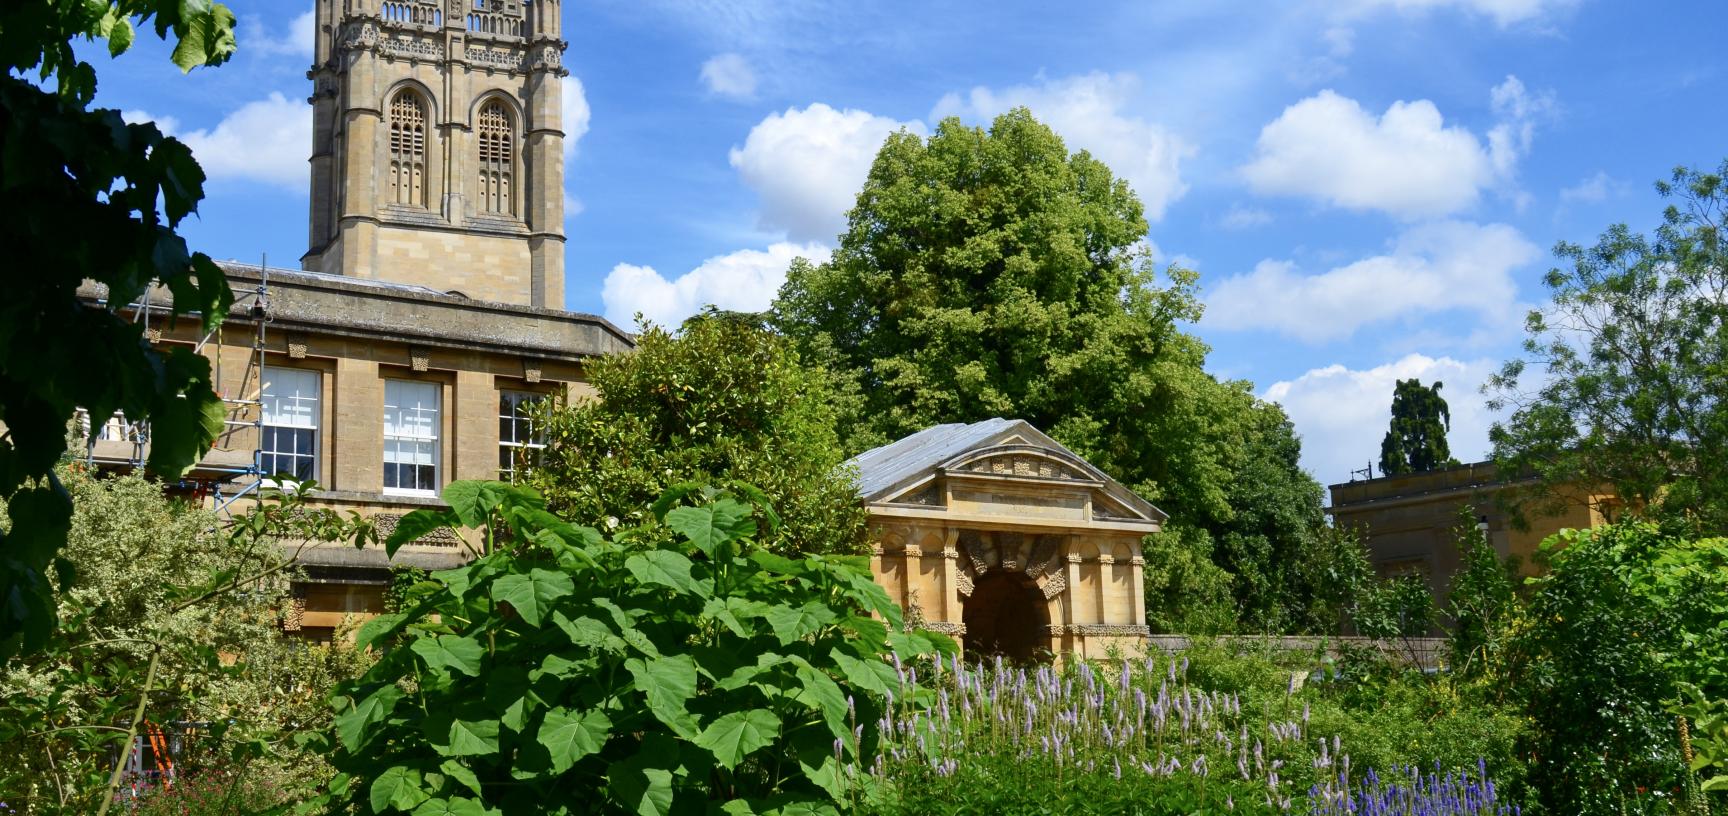 Walled Garden and Magdalen Tower